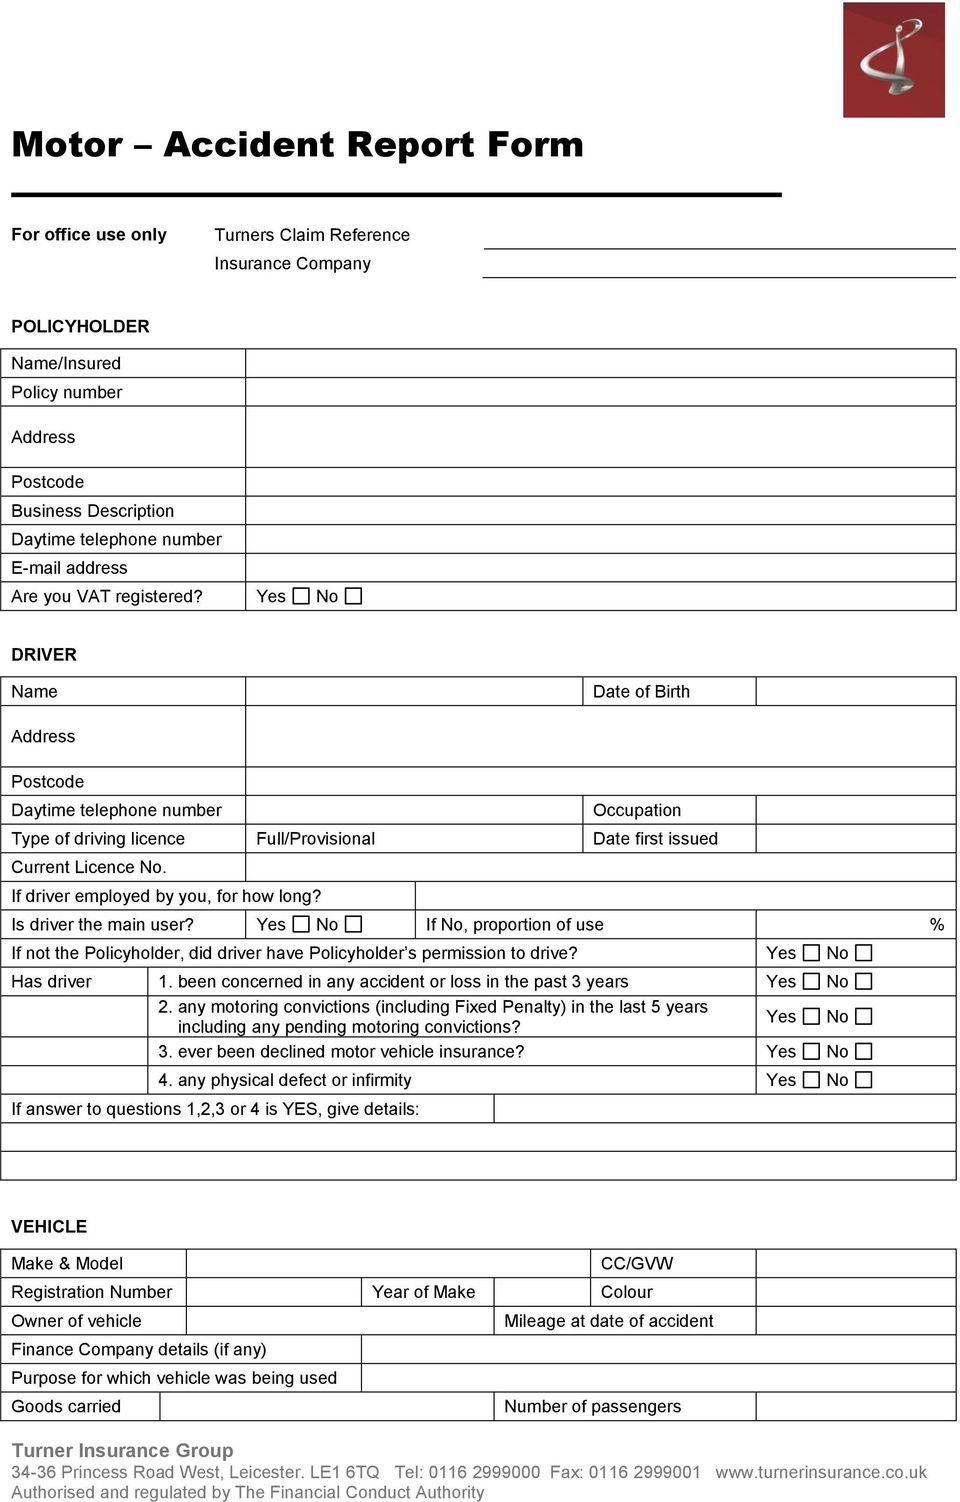 Motor Accident Report Form - PDF Free Download Regarding Vehicle Accident Report Template